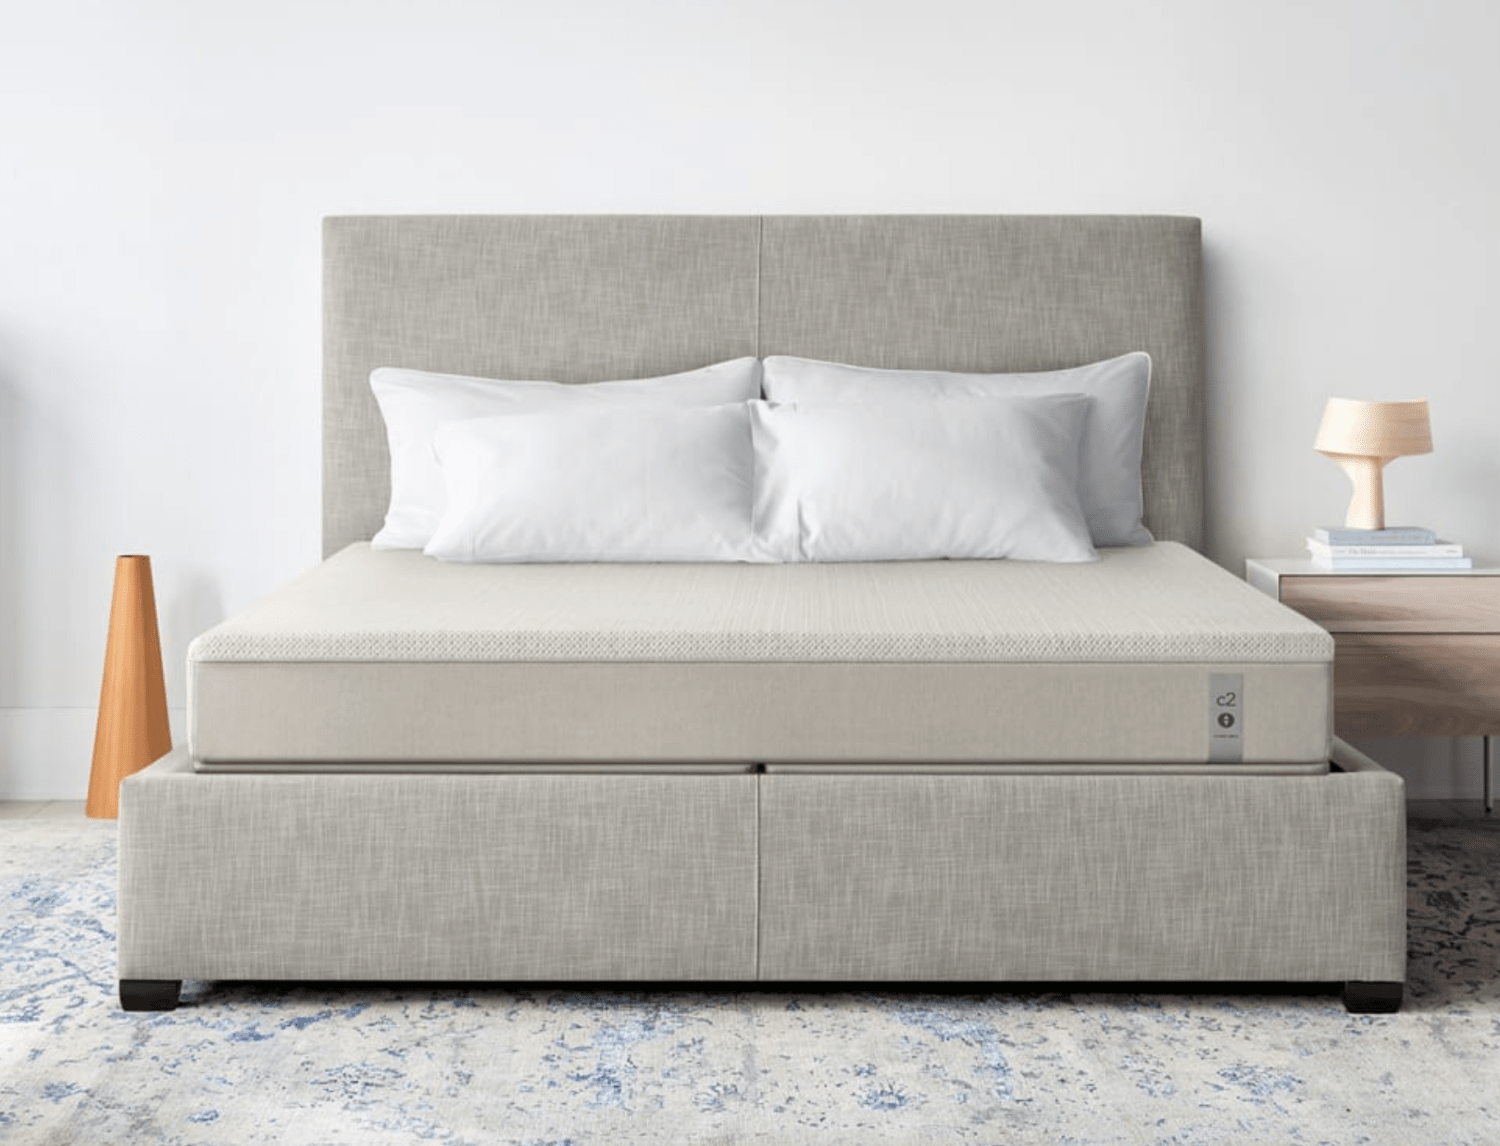 The Best Smart Beds Of 2020 According, How Much Money Is A King Size Sleep Number Bed